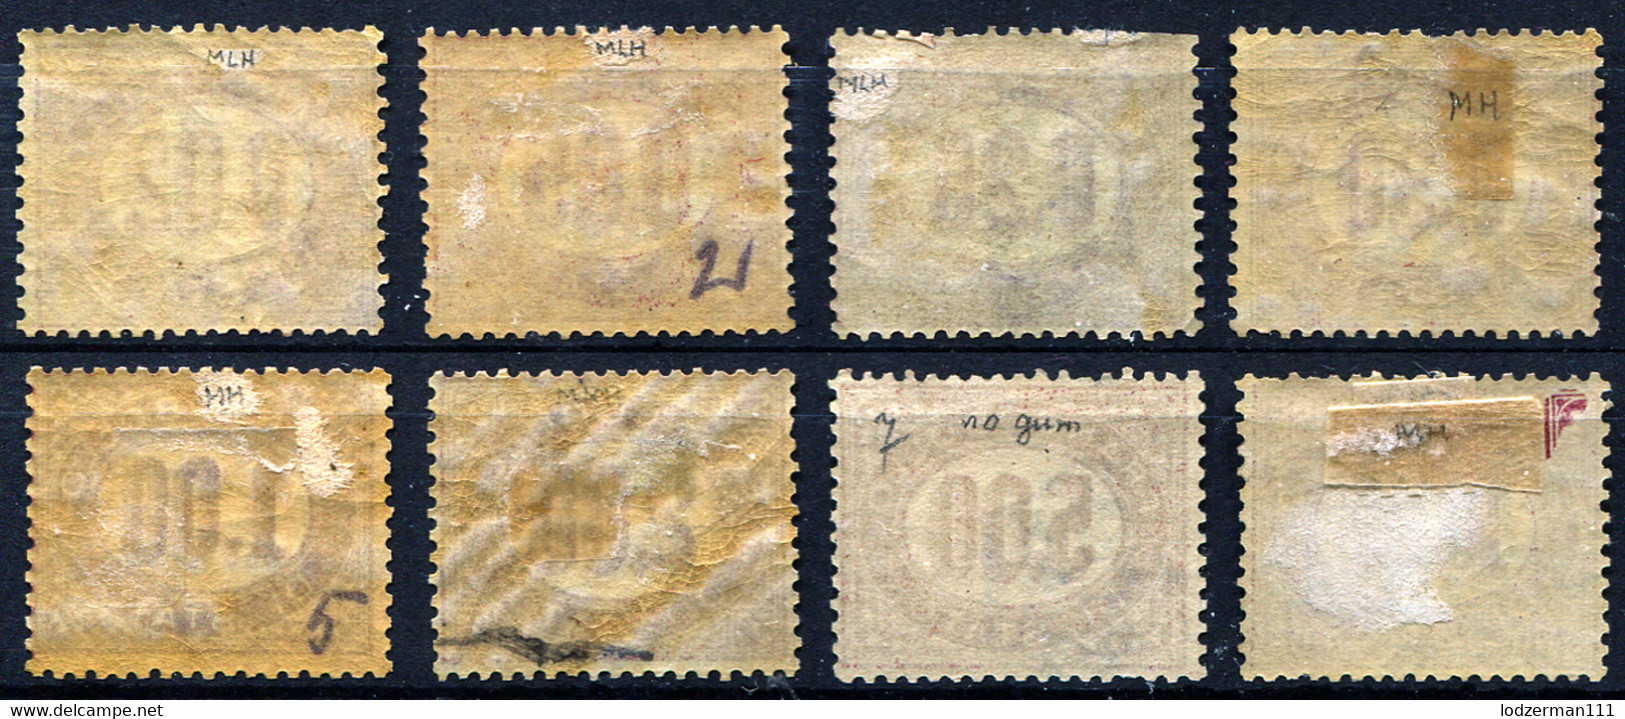 ITALY Official 1875 - Mi.Dienst 1-8 (Yv.TS 1-8, Sc.O1-8) MH-MLH (1 MNG) All VF - Officials